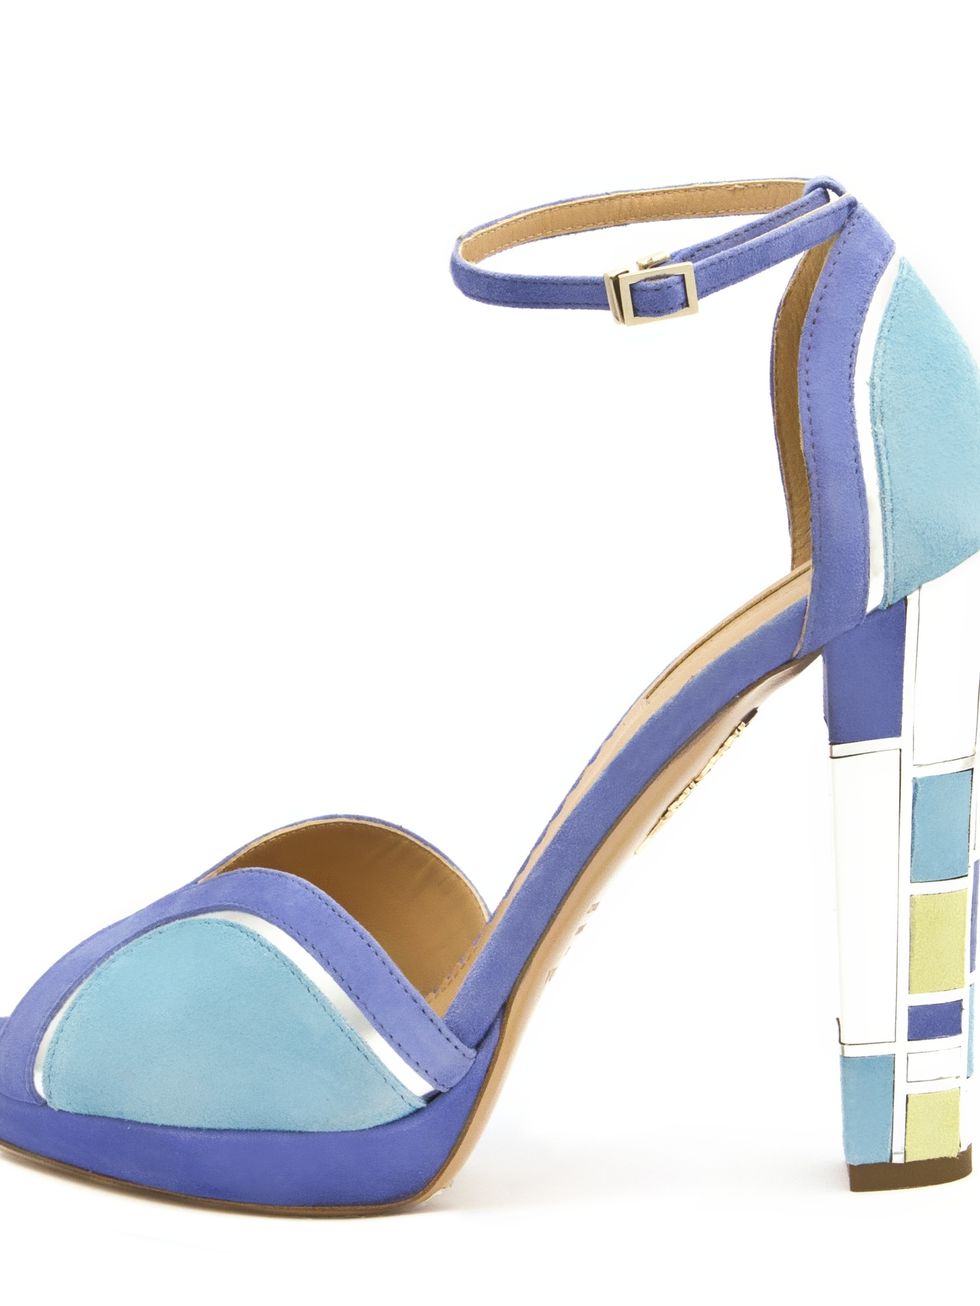 Footwear, Blue, Product, Brown, Yellow, High heels, Style, Sandal, Basic pump, Electric blue, 